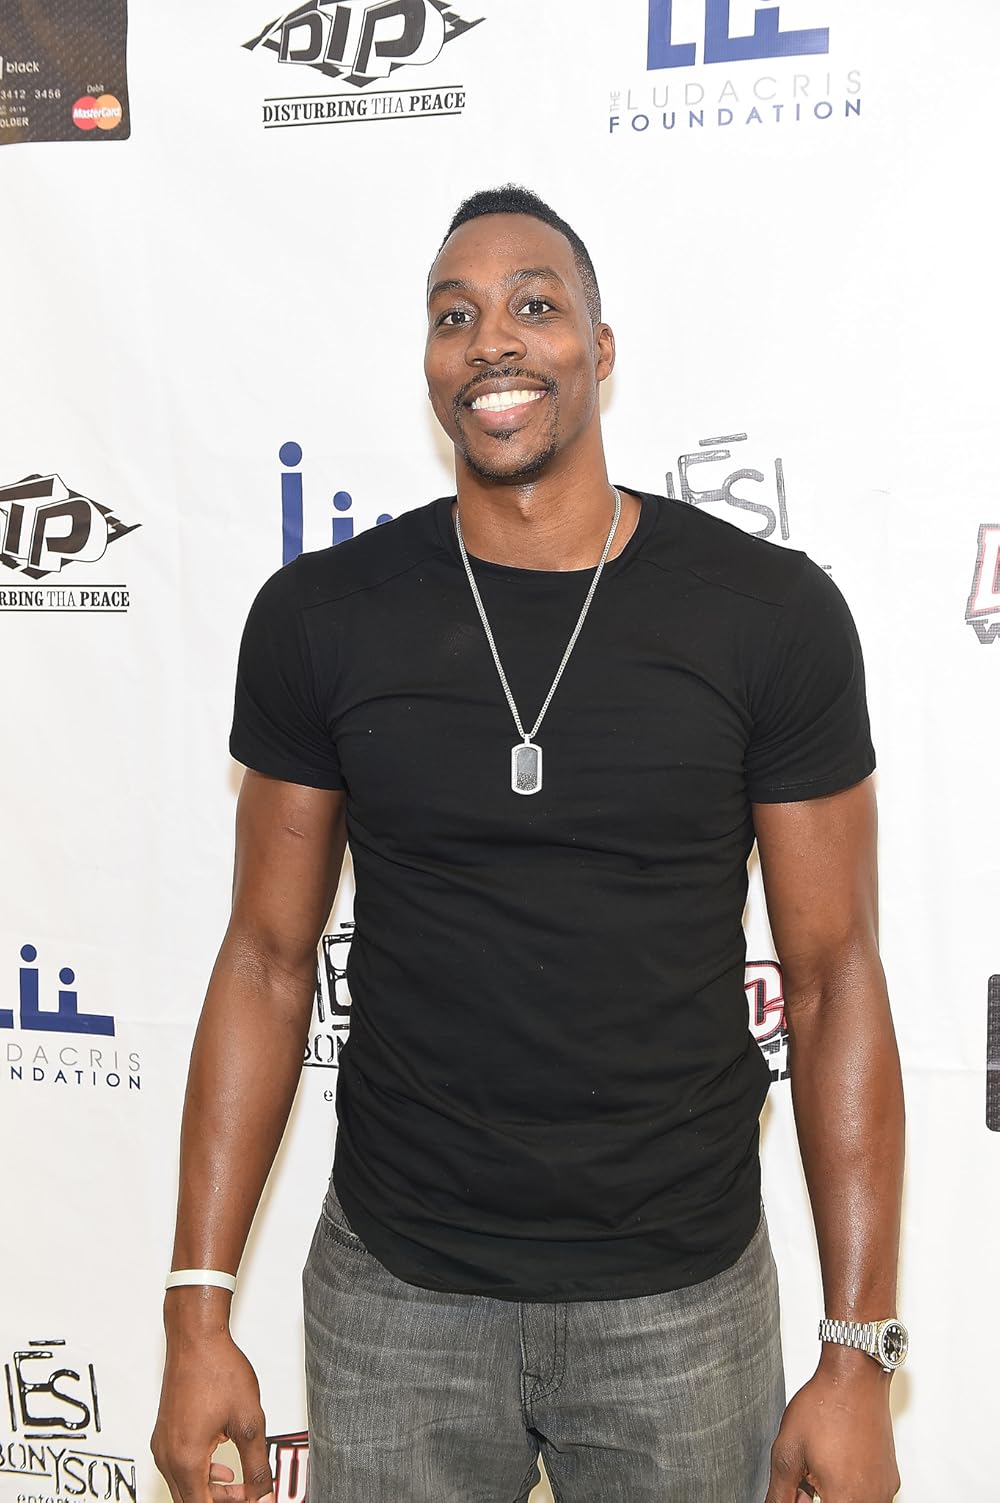 anna nylen recommends melanie rios dwight howard pic